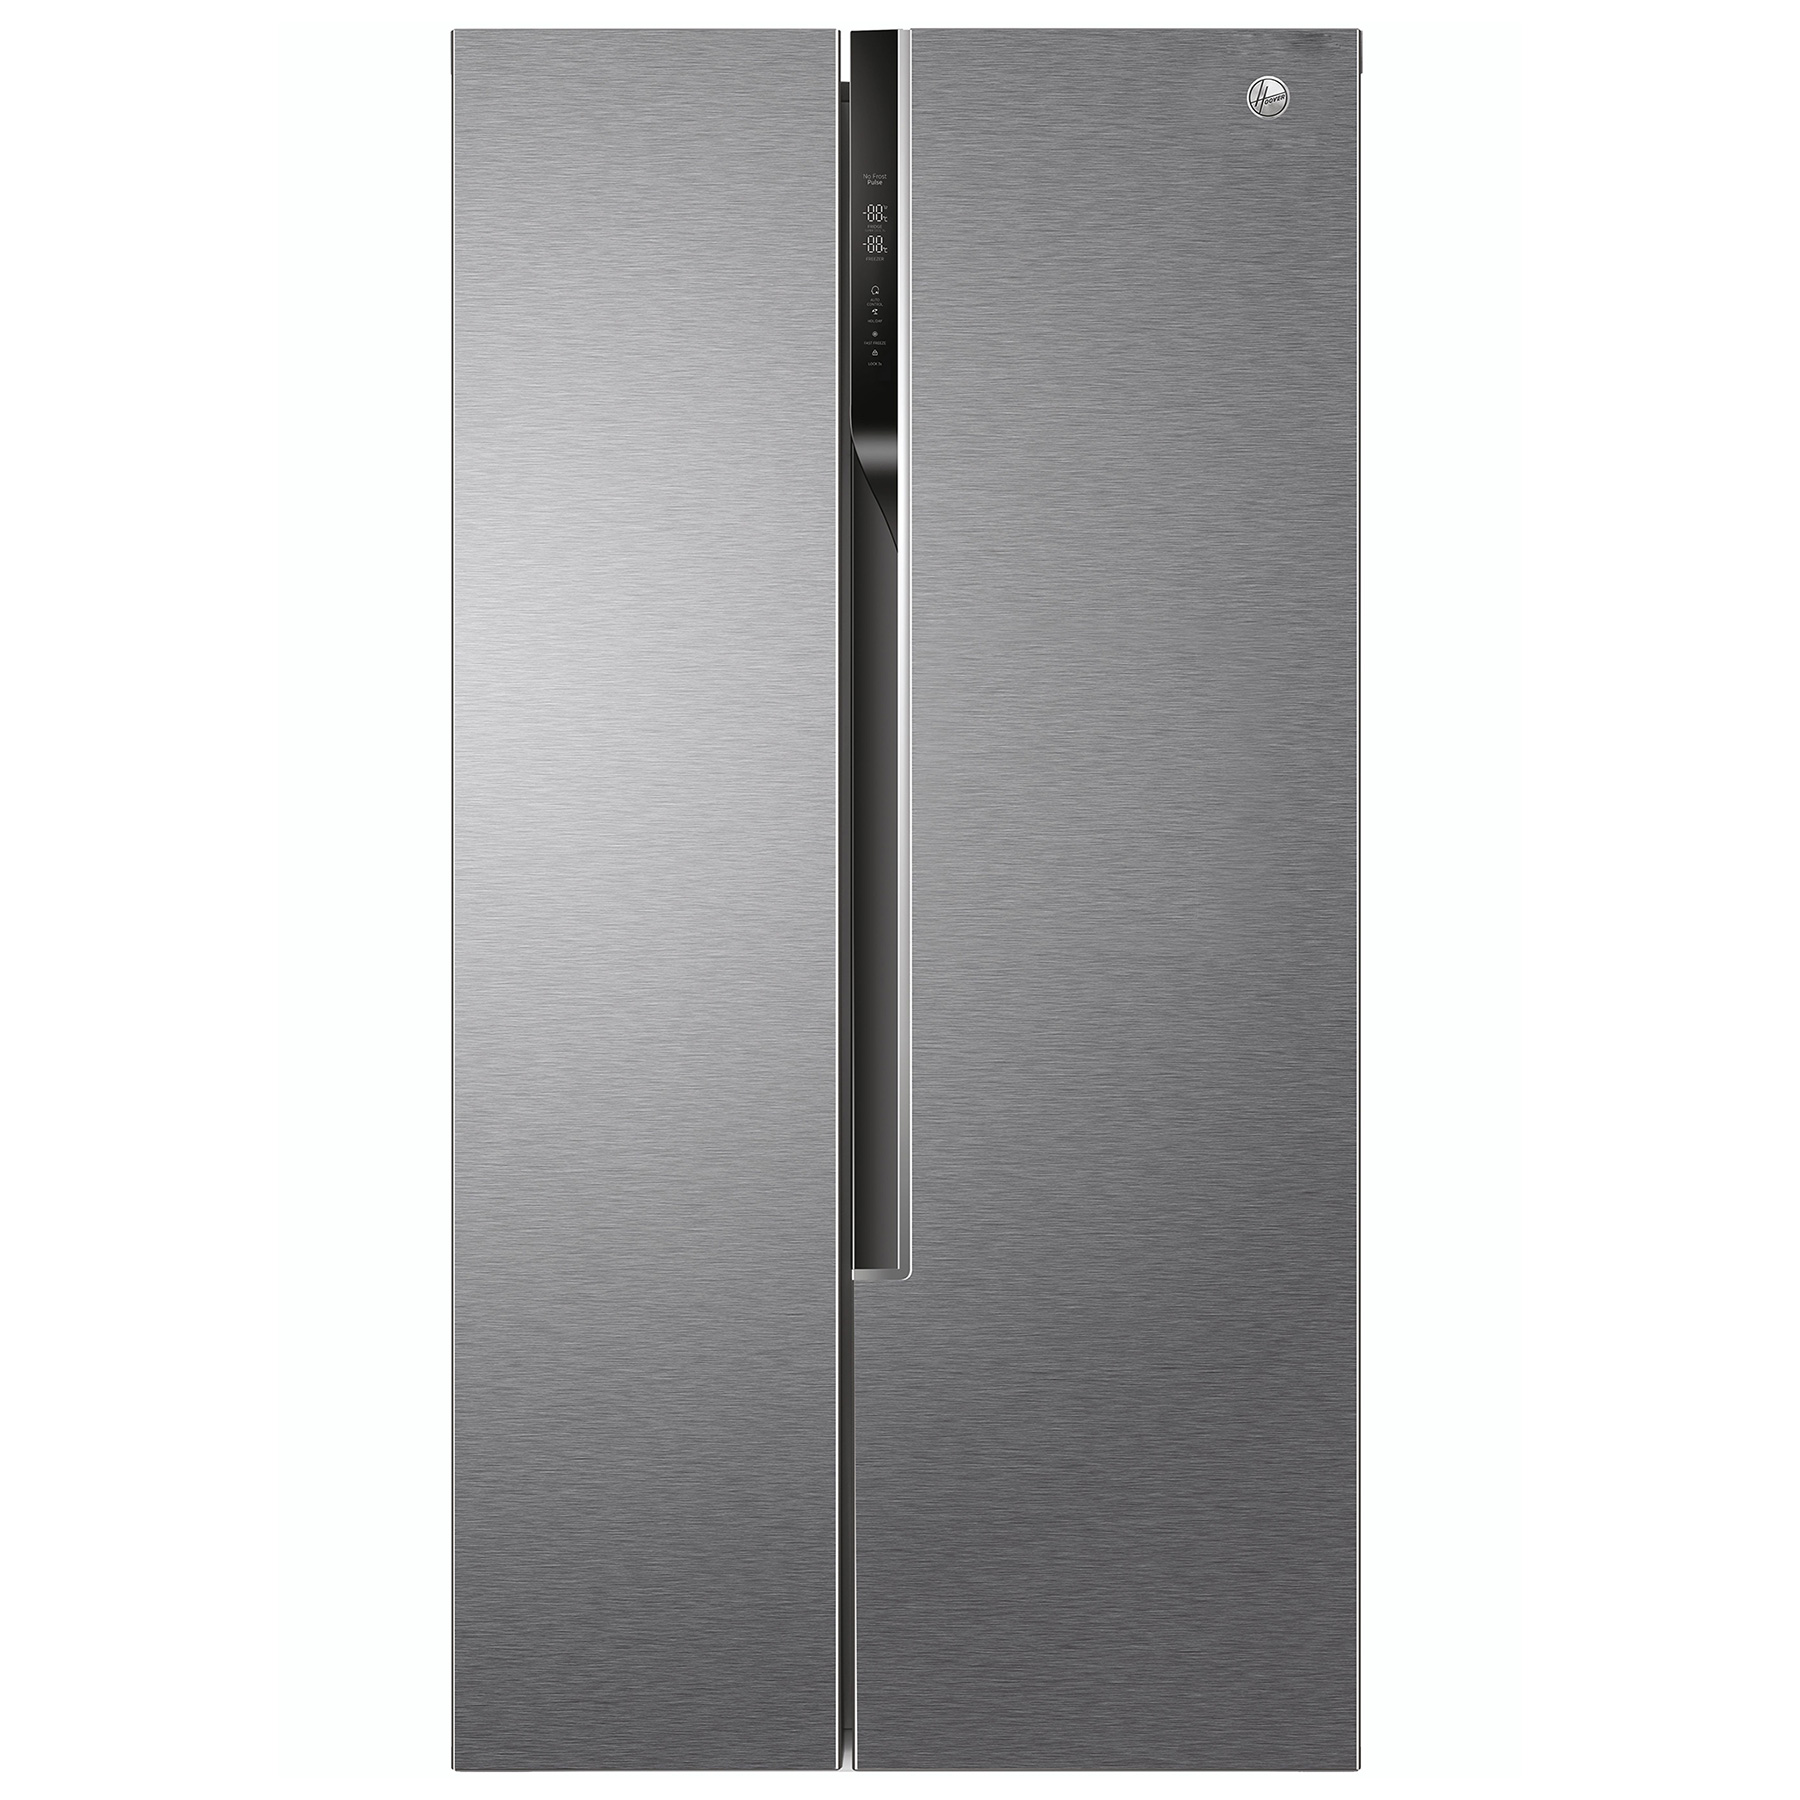 Image of Hoover HHSF918F1XK American Fridge Freezer Silver F Rated